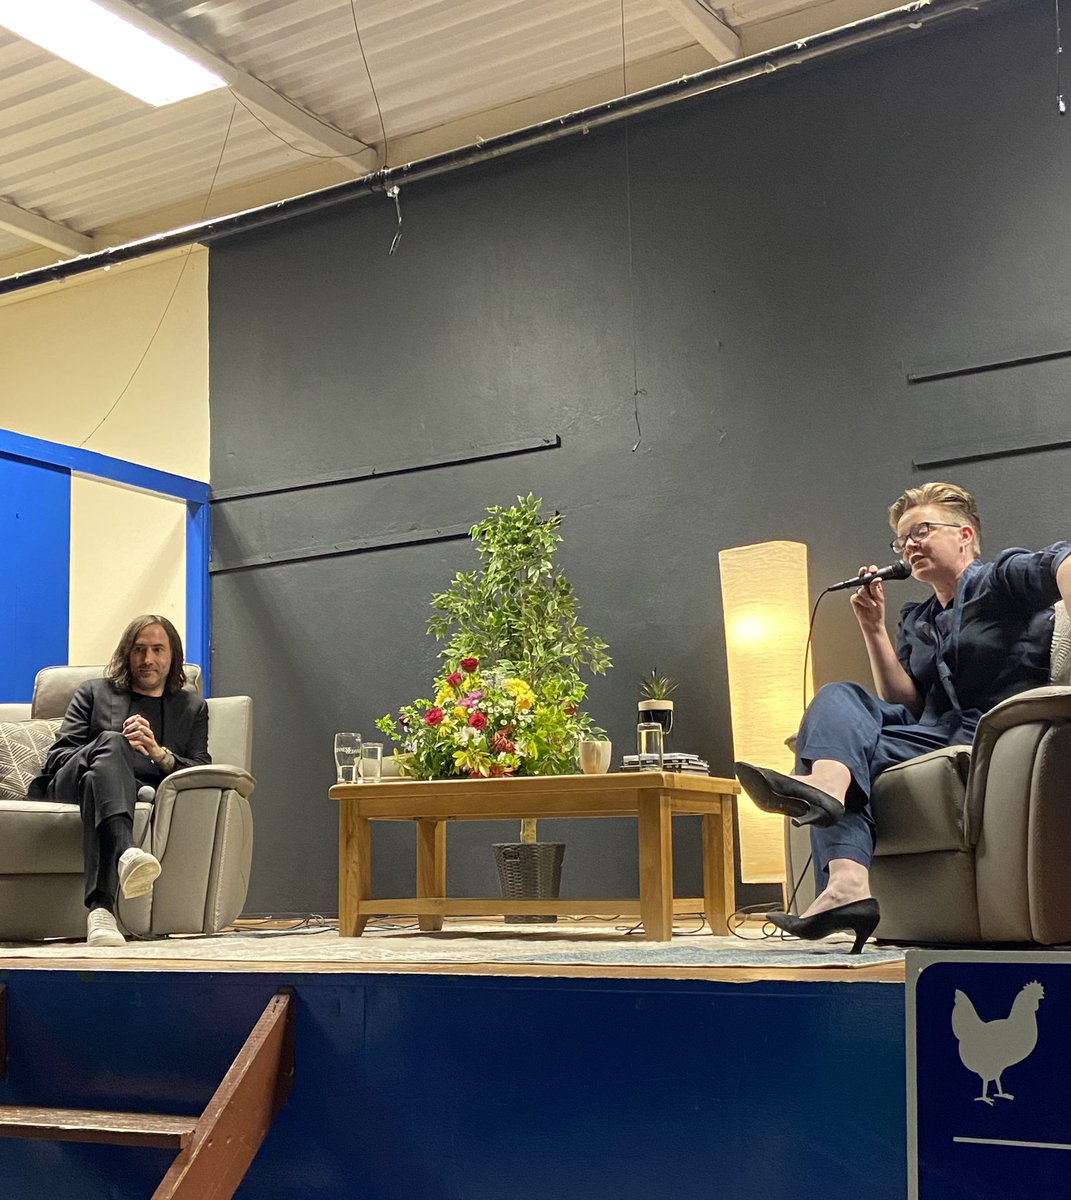 Great night at Granard Booktown Festival last night listening to Booker prize winner Paul Lynch interviewed by Belinda McKeon. This festival brings amazing writers and speakers to Granard, it’s a brilliant event.